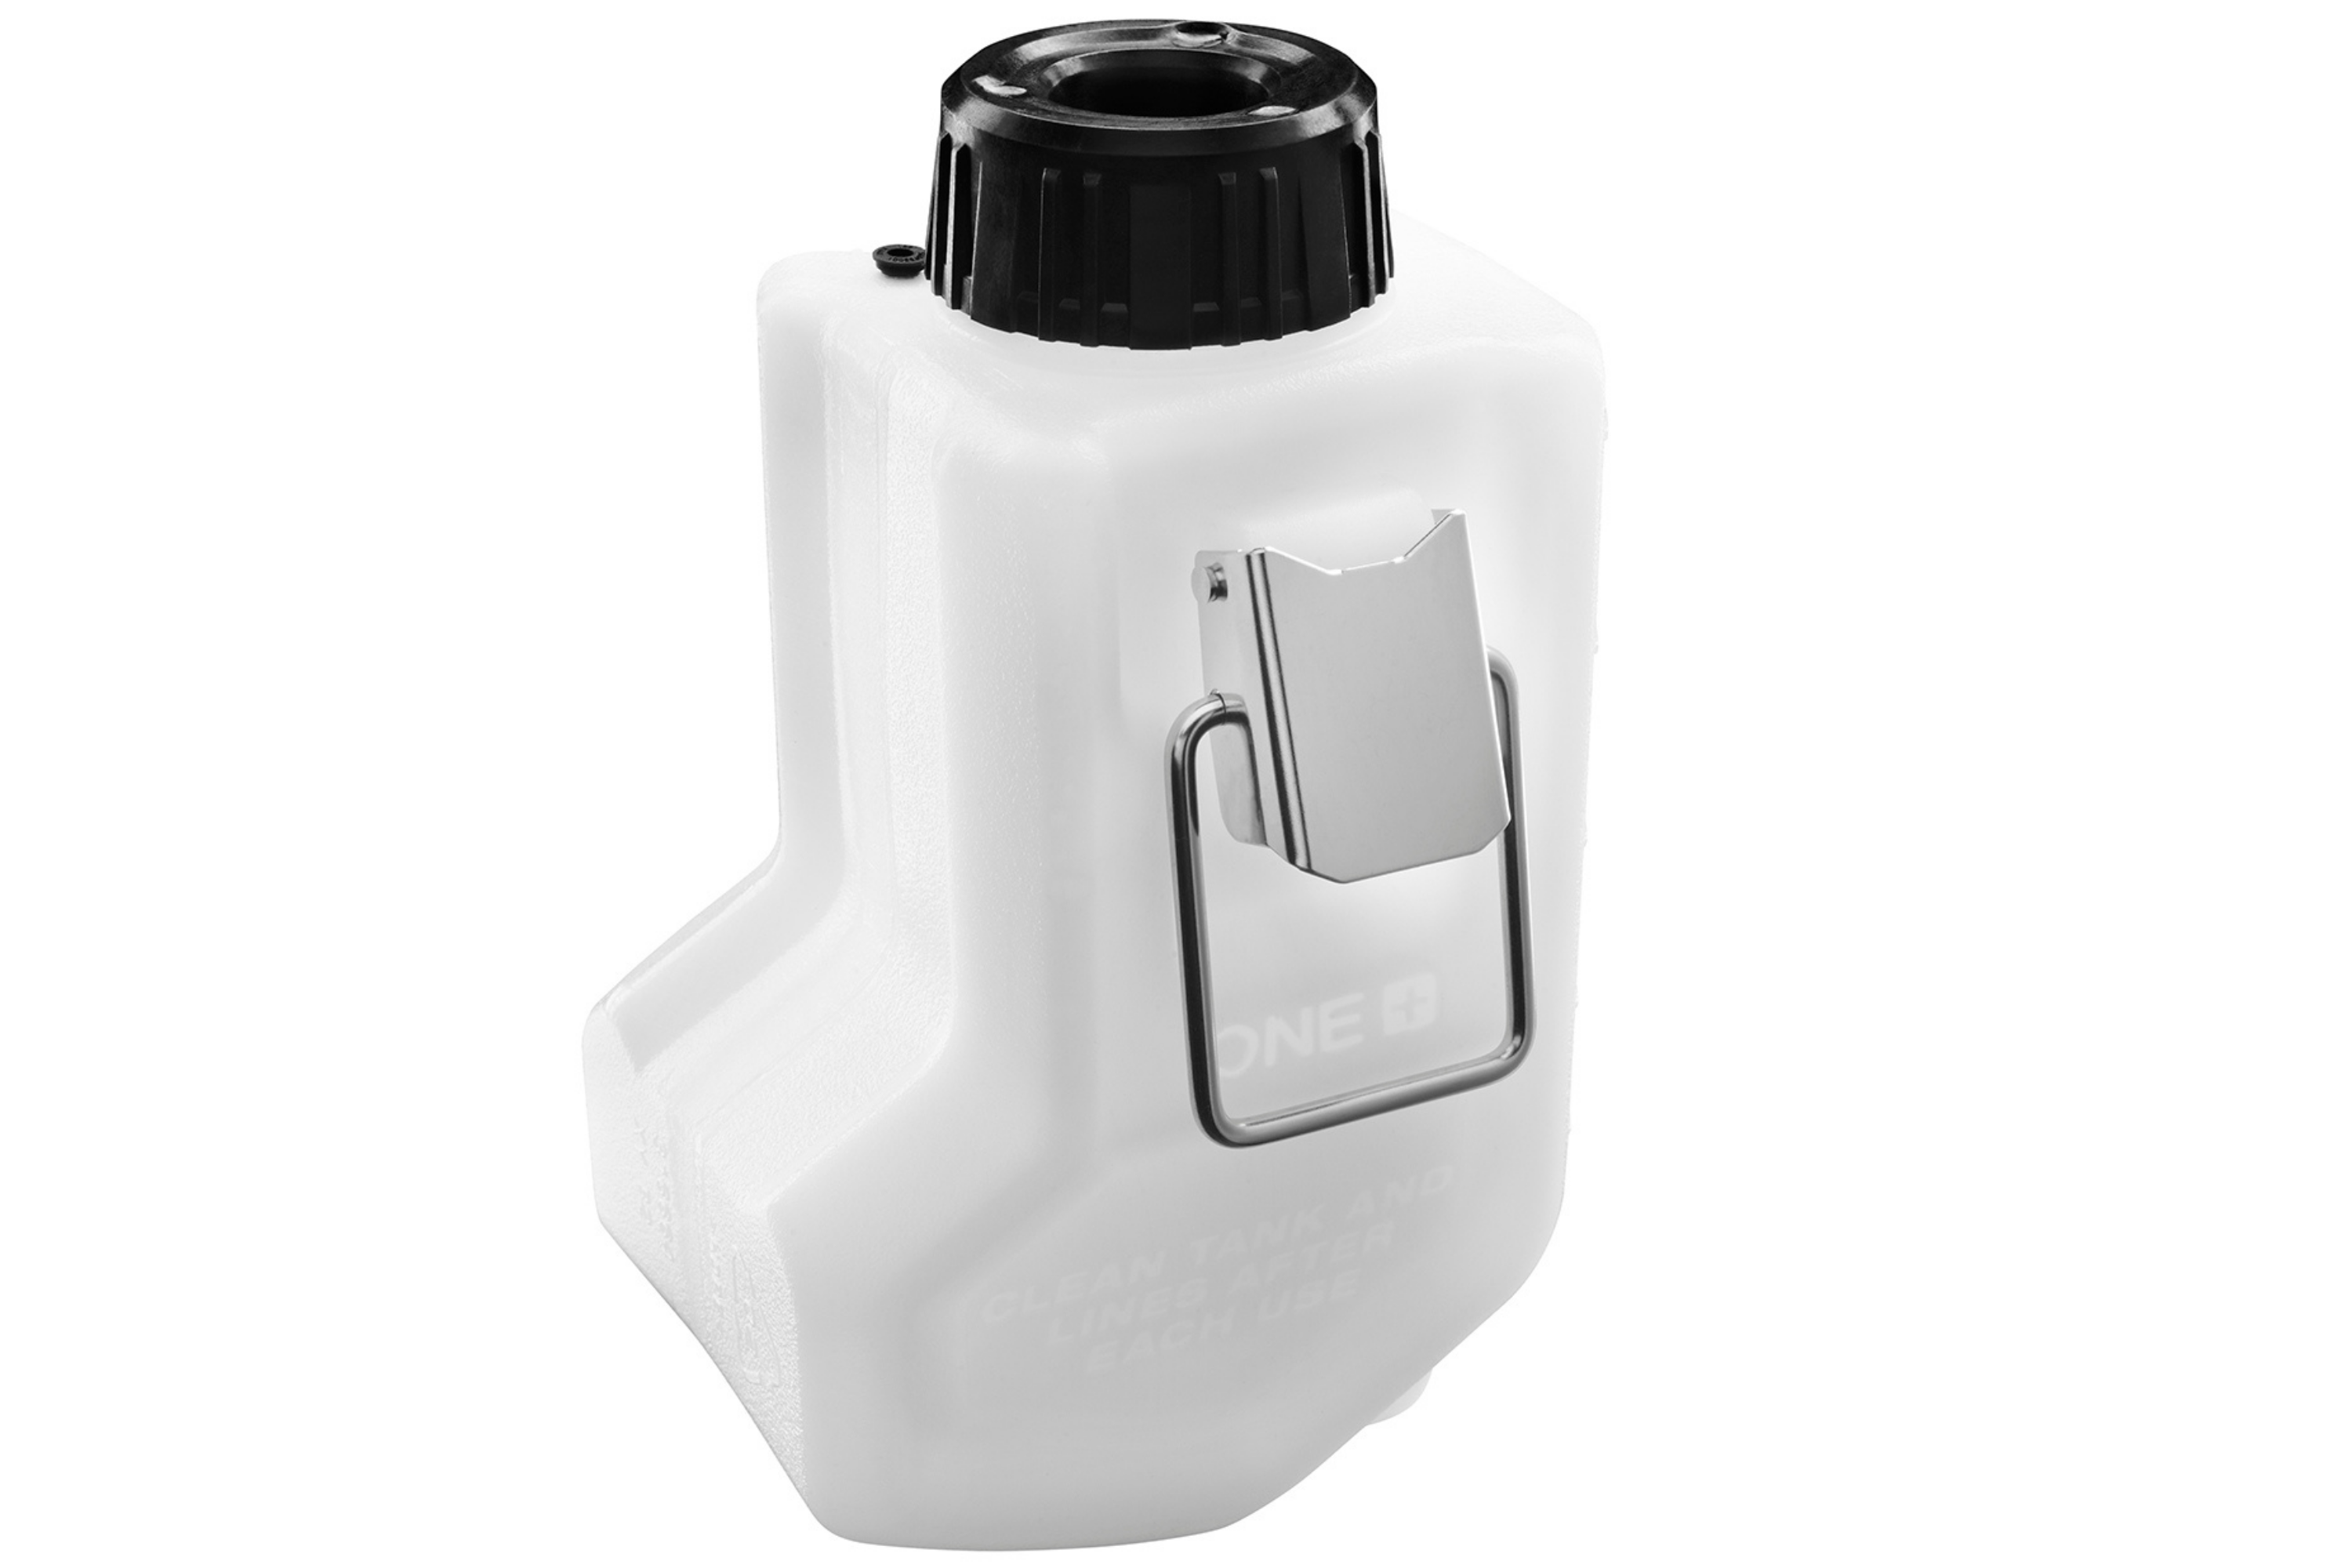 Feature Image for 15 OZ. REPLACEMENT TANK FOR THE 18V ONE+ HANDHELD SPRAYER.